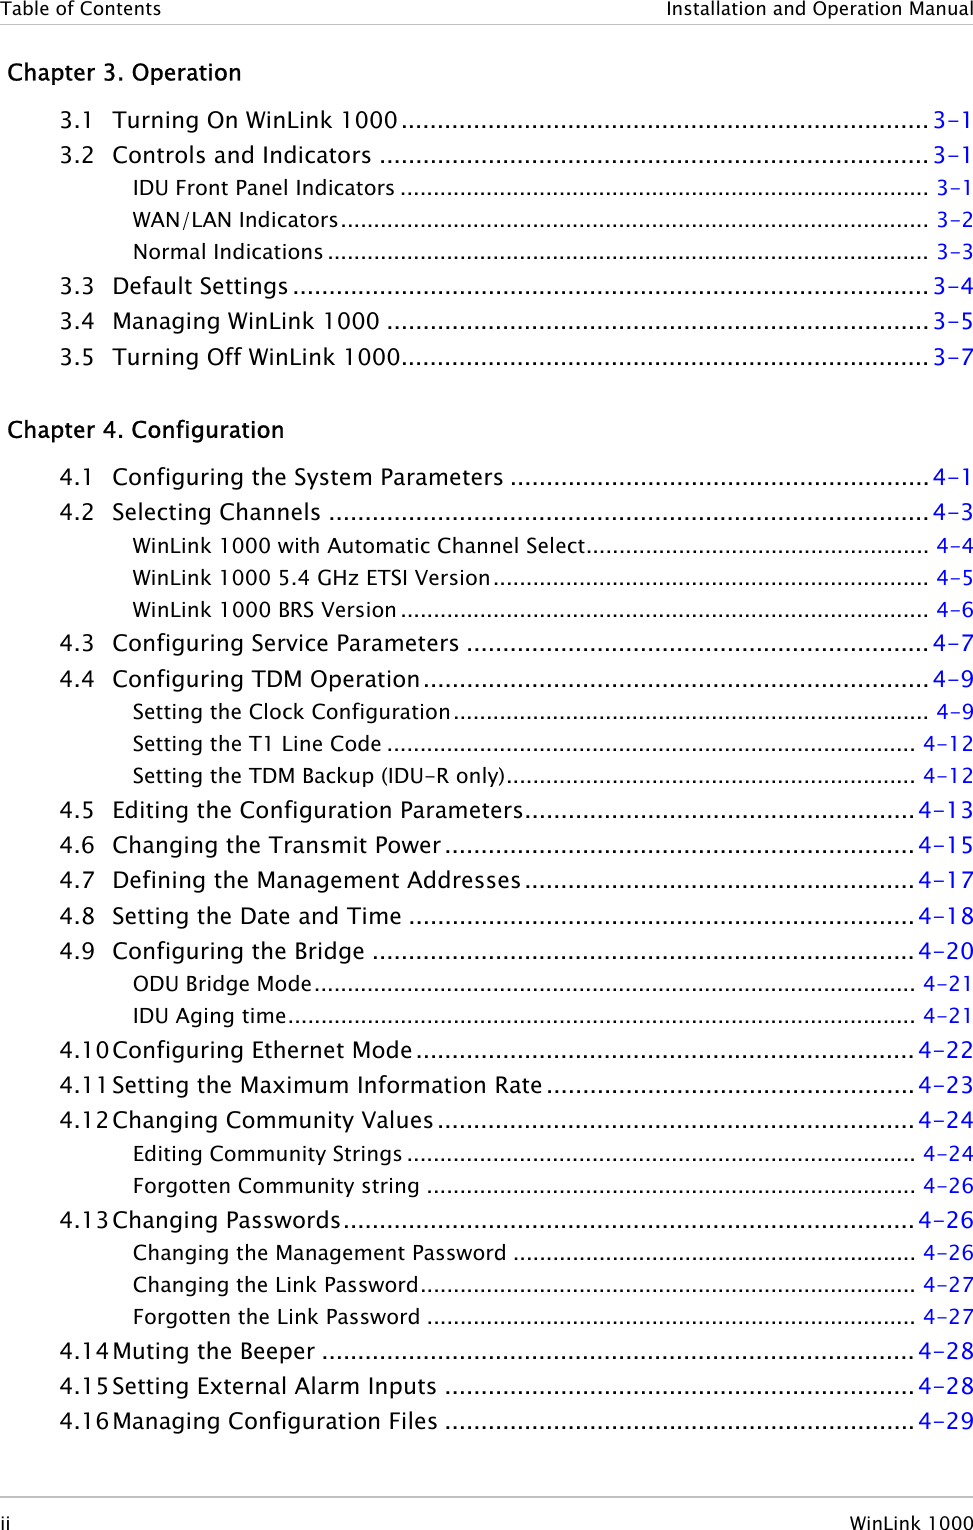 Table of Contents  Installation and Operation Manual  Chapter 3. Operation 3.1 Turning On WinLink 1000......................................................................... 3-1 3.2 Controls and Indicators ............................................................................3-1 IDU Front Panel Indicators ................................................................................ 3-1 WAN/LAN Indicators......................................................................................... 3-2 Normal Indications ........................................................................................... 3-3 3.3 Default Settings ........................................................................................ 3-4 3.4 Managing WinLink 1000 ...........................................................................3-5 3.5 Turning Off WinLink 1000......................................................................... 3-7  Chapter 4. Configuration 4.1 Configuring the System Parameters ..........................................................4-1 4.2 Selecting Channels ...................................................................................4-3 WinLink 1000 with Automatic Channel Select.................................................... 4-4 WinLink 1000 5.4 GHz ETSI Version.................................................................. 4-5 WinLink 1000 BRS Version................................................................................ 4-6 4.3 Configuring Service Parameters ................................................................ 4-7 4.4 Configuring TDM Operation...................................................................... 4-9 Setting the Clock Configuration........................................................................ 4-9 Setting the T1 Line Code ................................................................................ 4-12 Setting the TDM Backup (IDU-R only).............................................................. 4-12 4.5 Editing the Configuration Parameters...................................................... 4-13 4.6 Changing the Transmit Power ................................................................. 4-15 4.7 Defining the Management Addresses ......................................................4-17 4.8 Setting the Date and Time ...................................................................... 4-18 4.9 Configuring the Bridge ...........................................................................4-20 ODU Bridge Mode........................................................................................... 4-21 IDU Aging time............................................................................................... 4-21 4.10 Configuring Ethernet Mode .....................................................................4-22 4.11 Setting the Maximum Information Rate ...................................................4-23 4.12 Changing Community Values .................................................................. 4-24 Editing Community Strings ............................................................................. 4-24 Forgotten Community string .......................................................................... 4-26 4.13 Changing Passwords...............................................................................4-26 Changing the Management Password ............................................................. 4-26 Changing the Link Password........................................................................... 4-27 Forgotten the Link Password .......................................................................... 4-27 4.14 Muting the Beeper .................................................................................. 4-28 4.15 Setting External Alarm Inputs .................................................................4-28 4.16 Managing Configuration Files .................................................................4-29 ii  WinLink 1000 